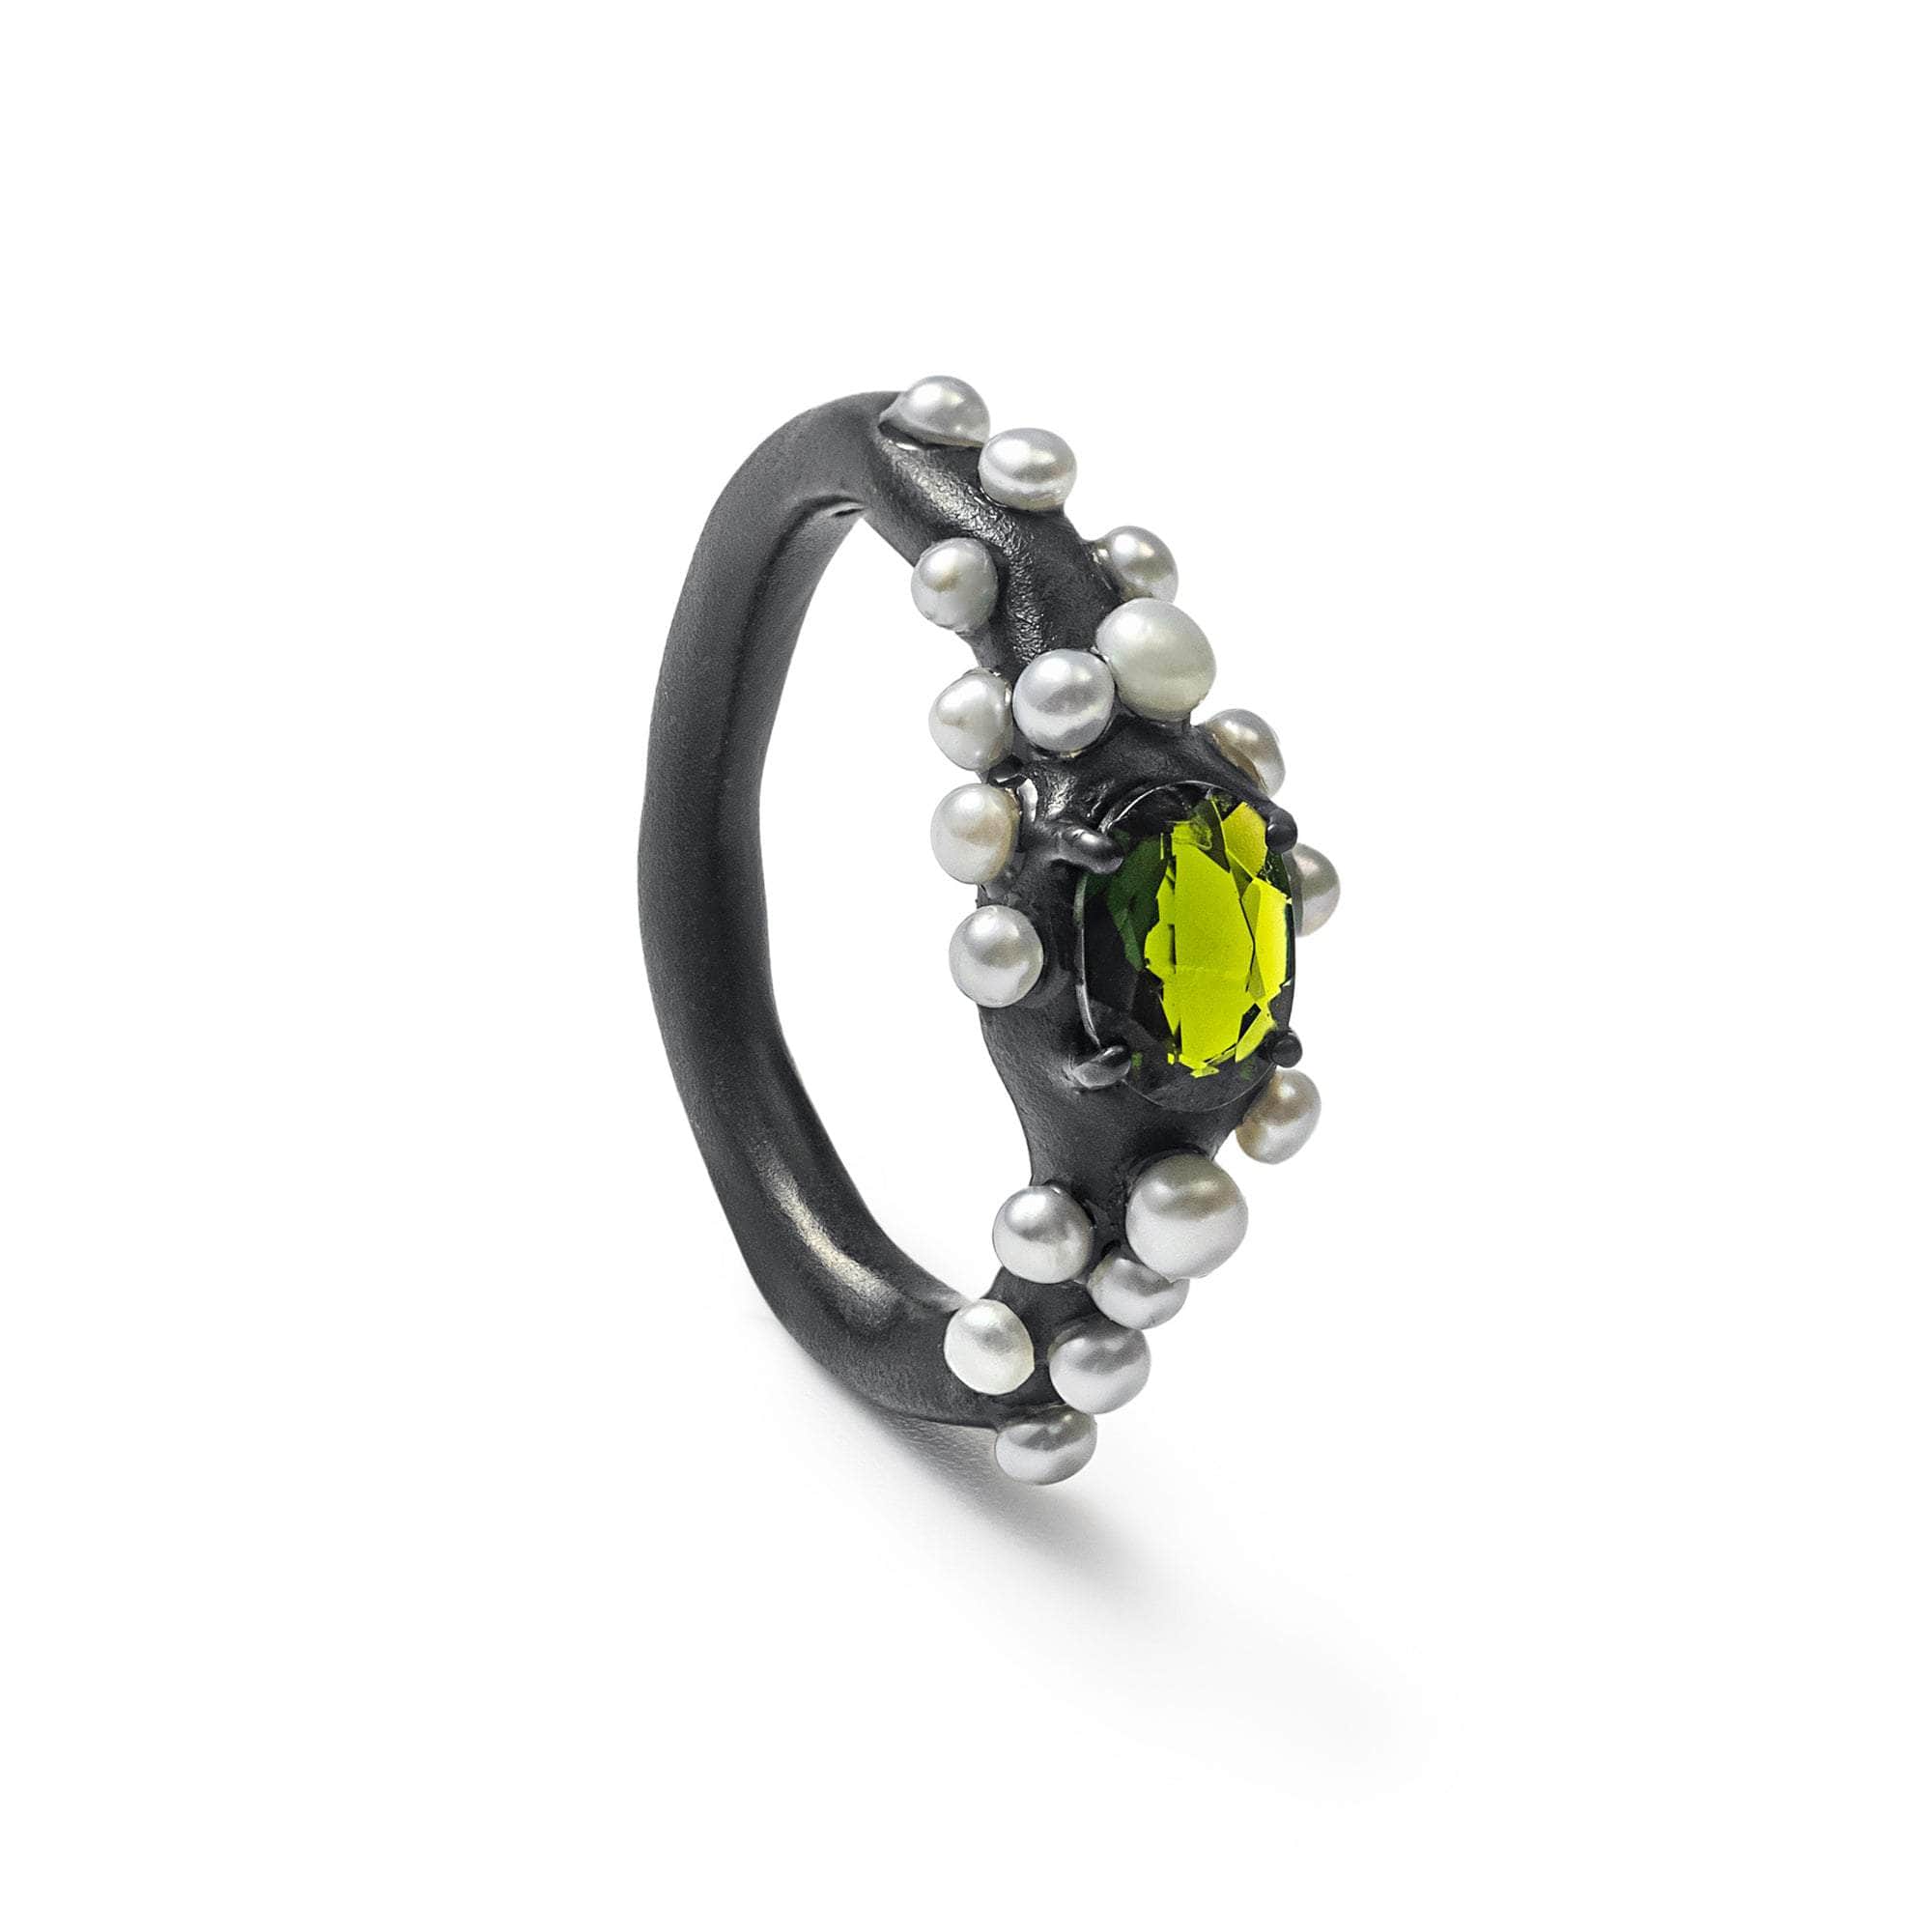 Bruch Chrome Diopside and Pearl Ring GERMAN KABIRSKI